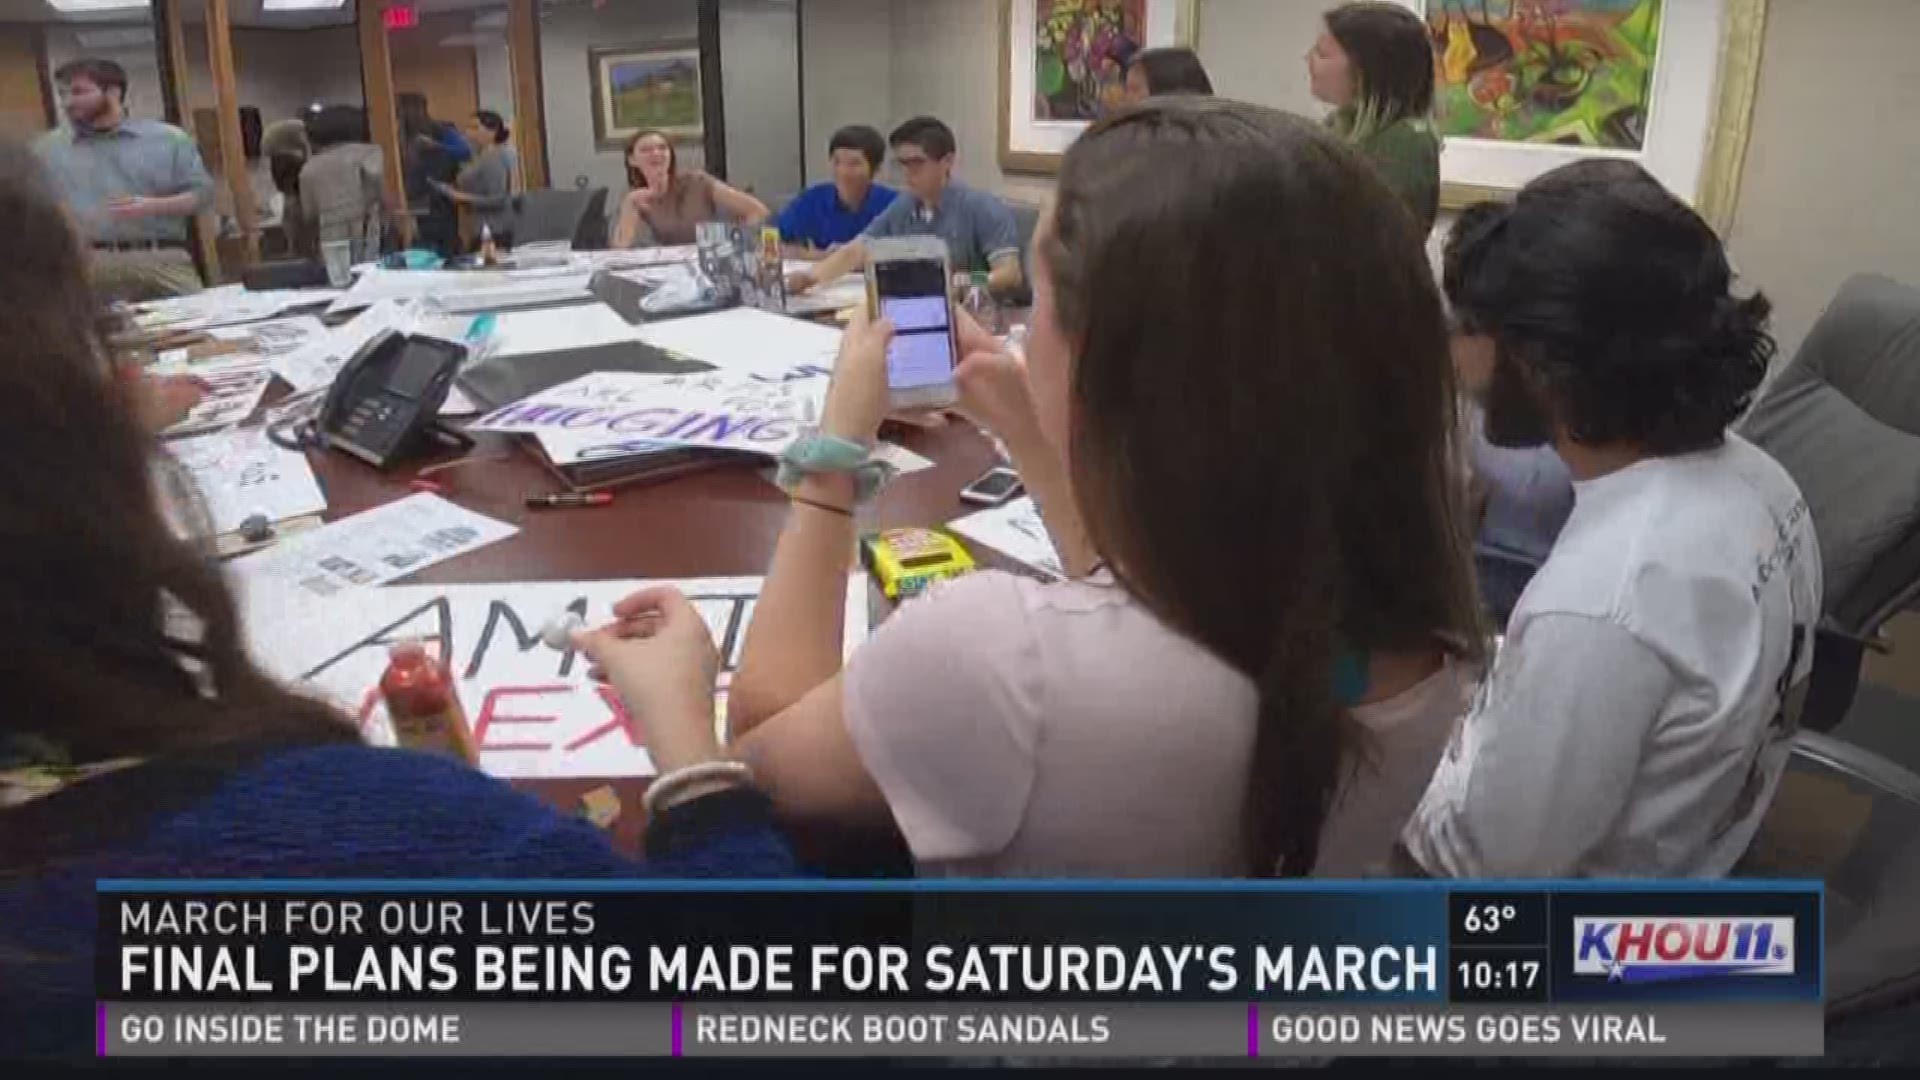 The final plans are being made for Saturday's 'March for Our Lives in Houston, an event organized by students. 